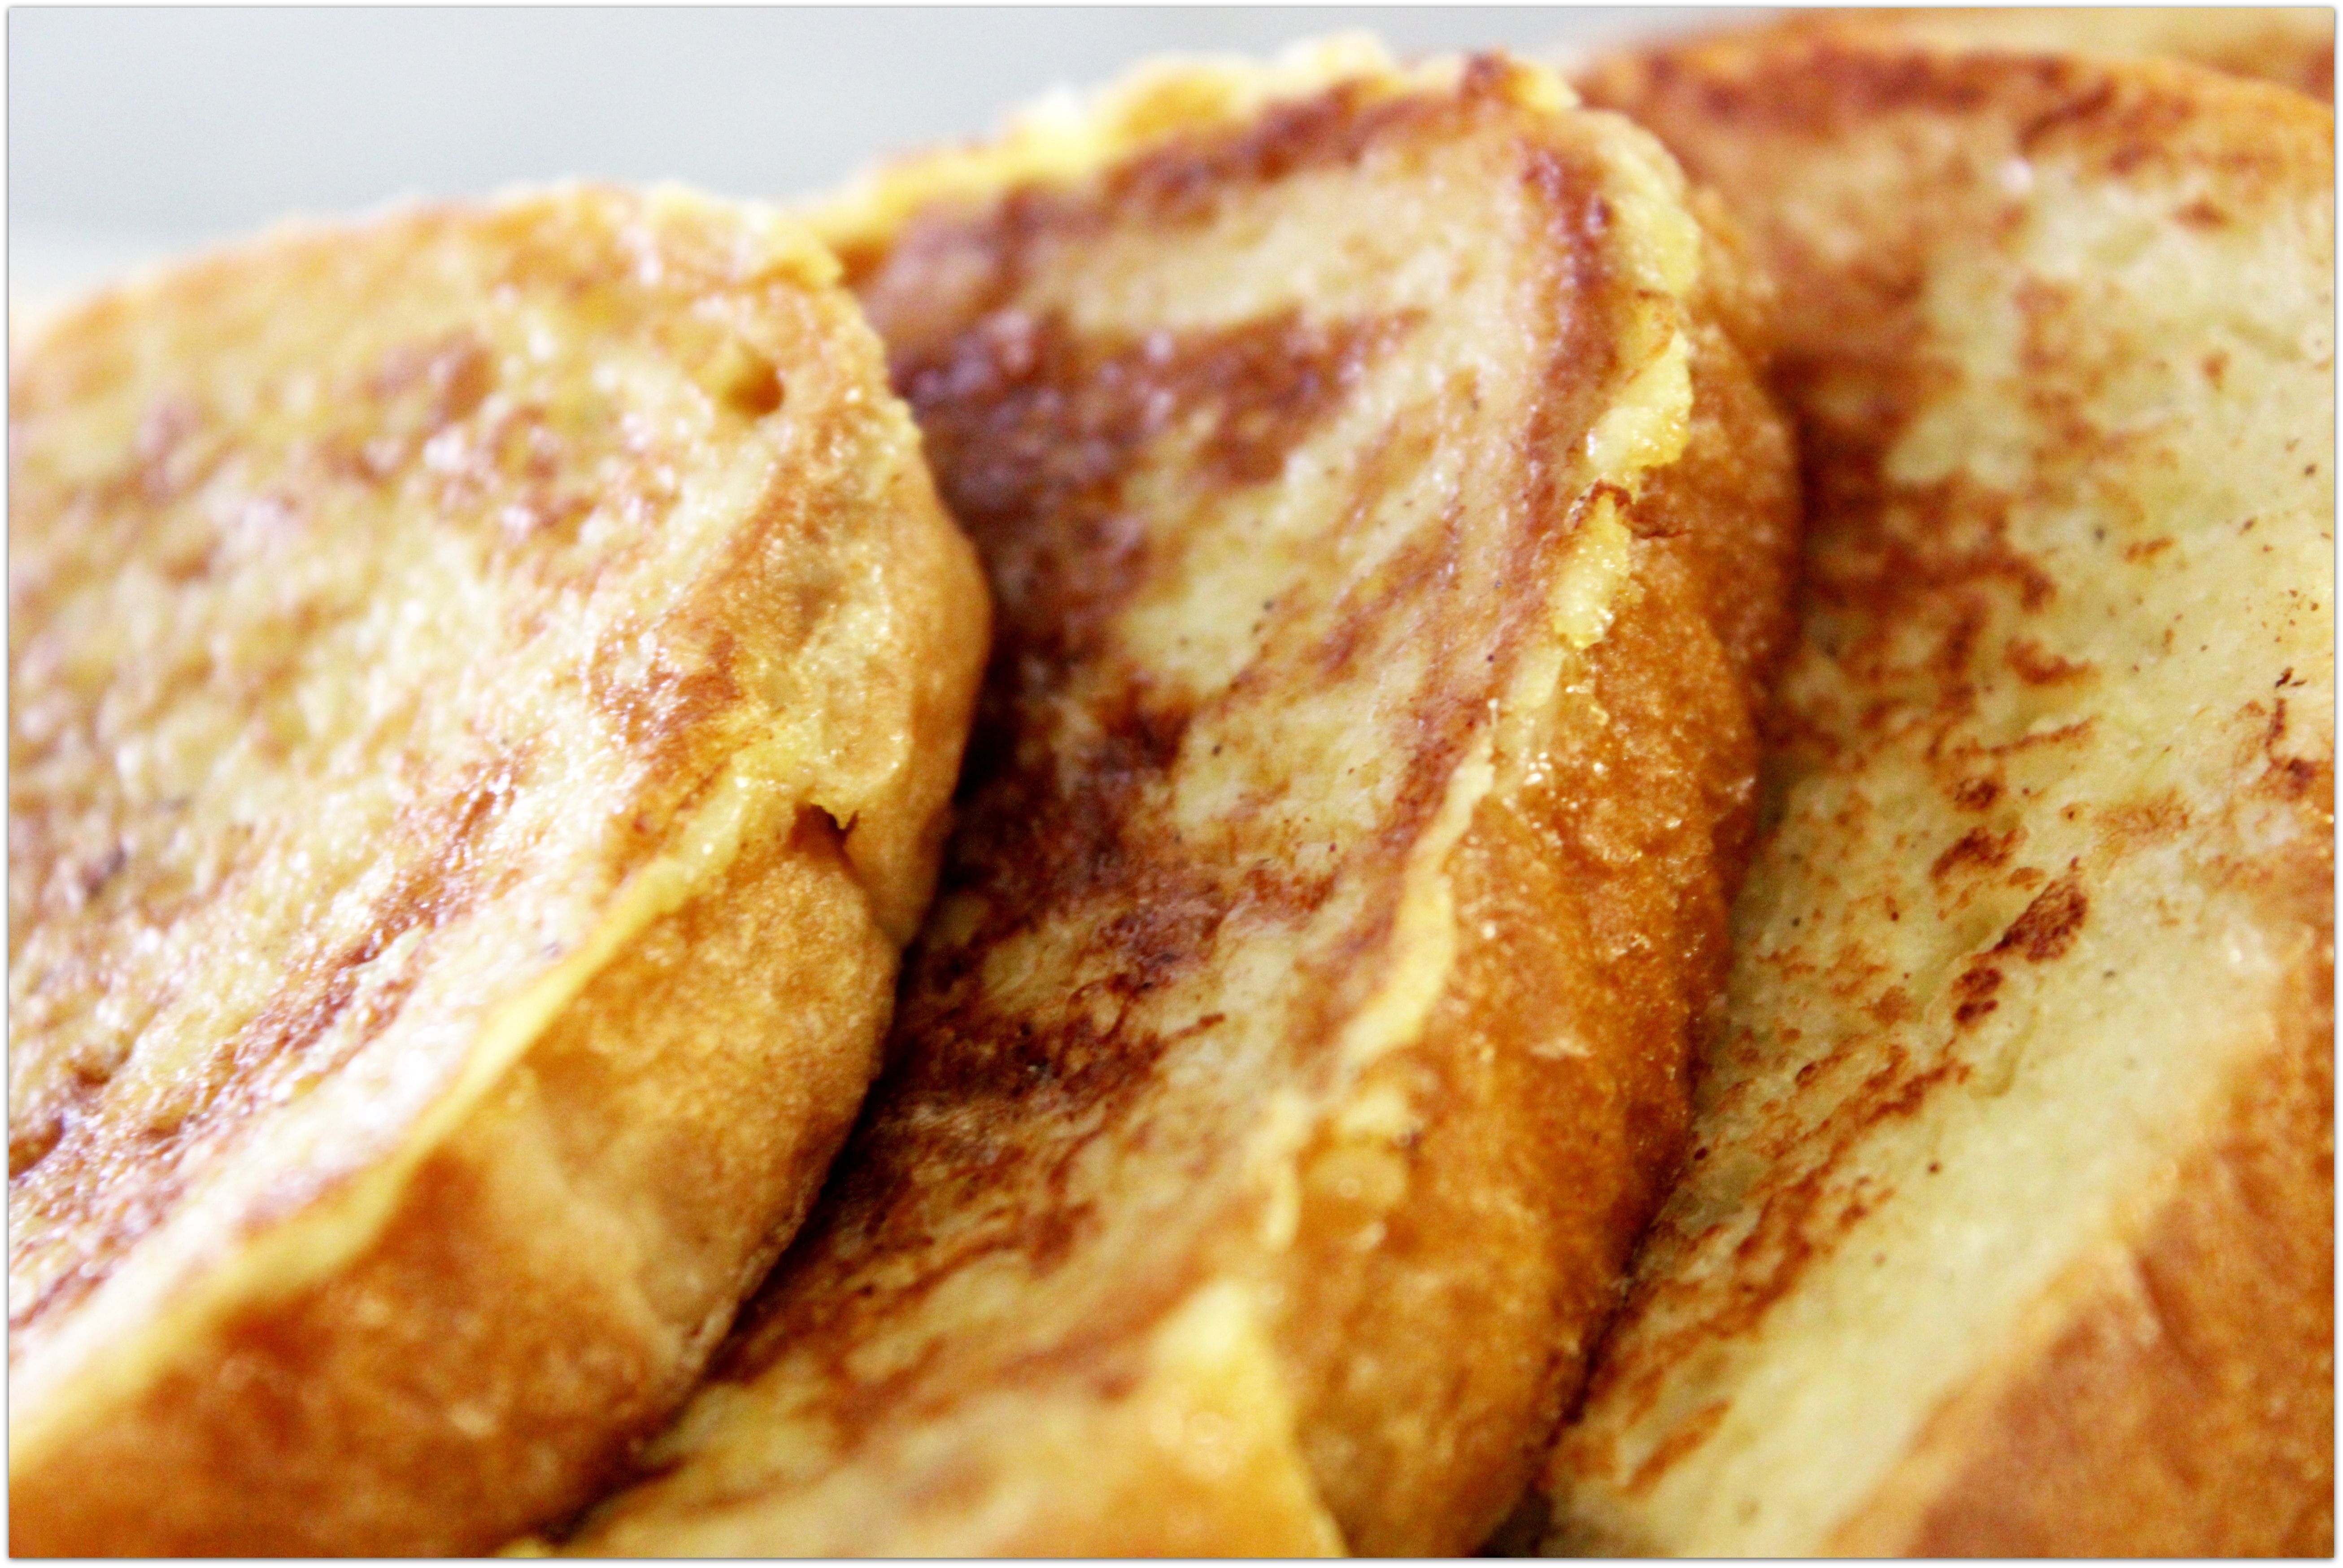 French toast Wallpaper Image Photo Picture Background